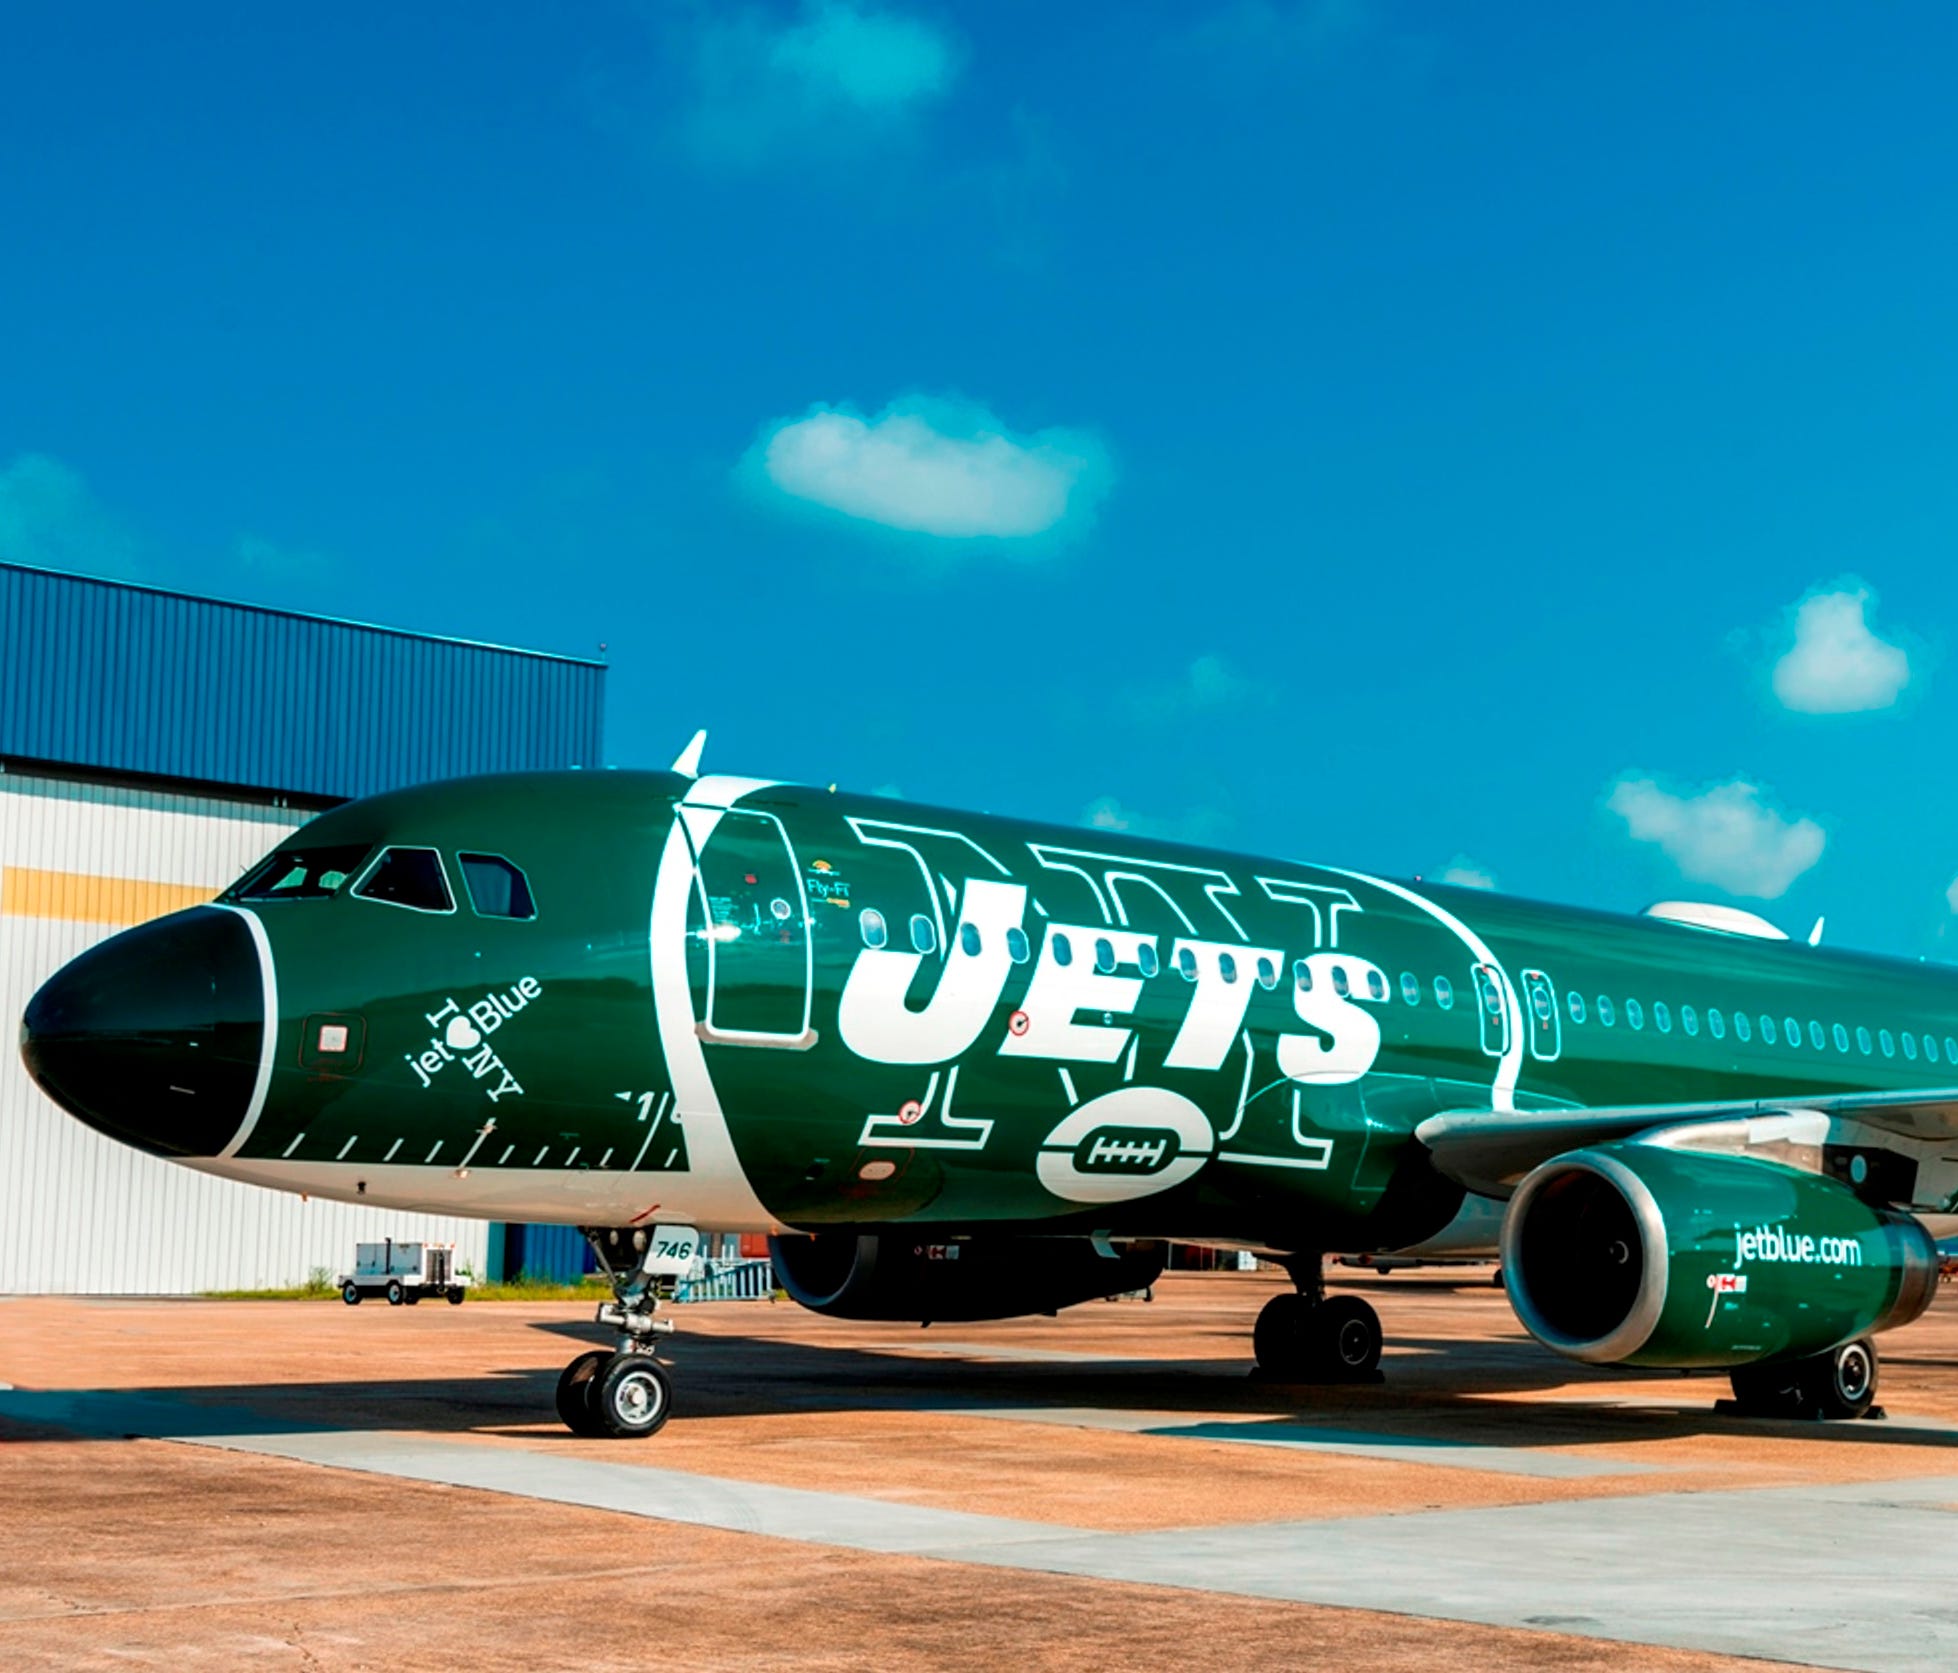 JetBlue rolled out this updates New York Jets-themed paint scheme to one of its Airbus A320s on Tuesday, Sept. 26, 2017.